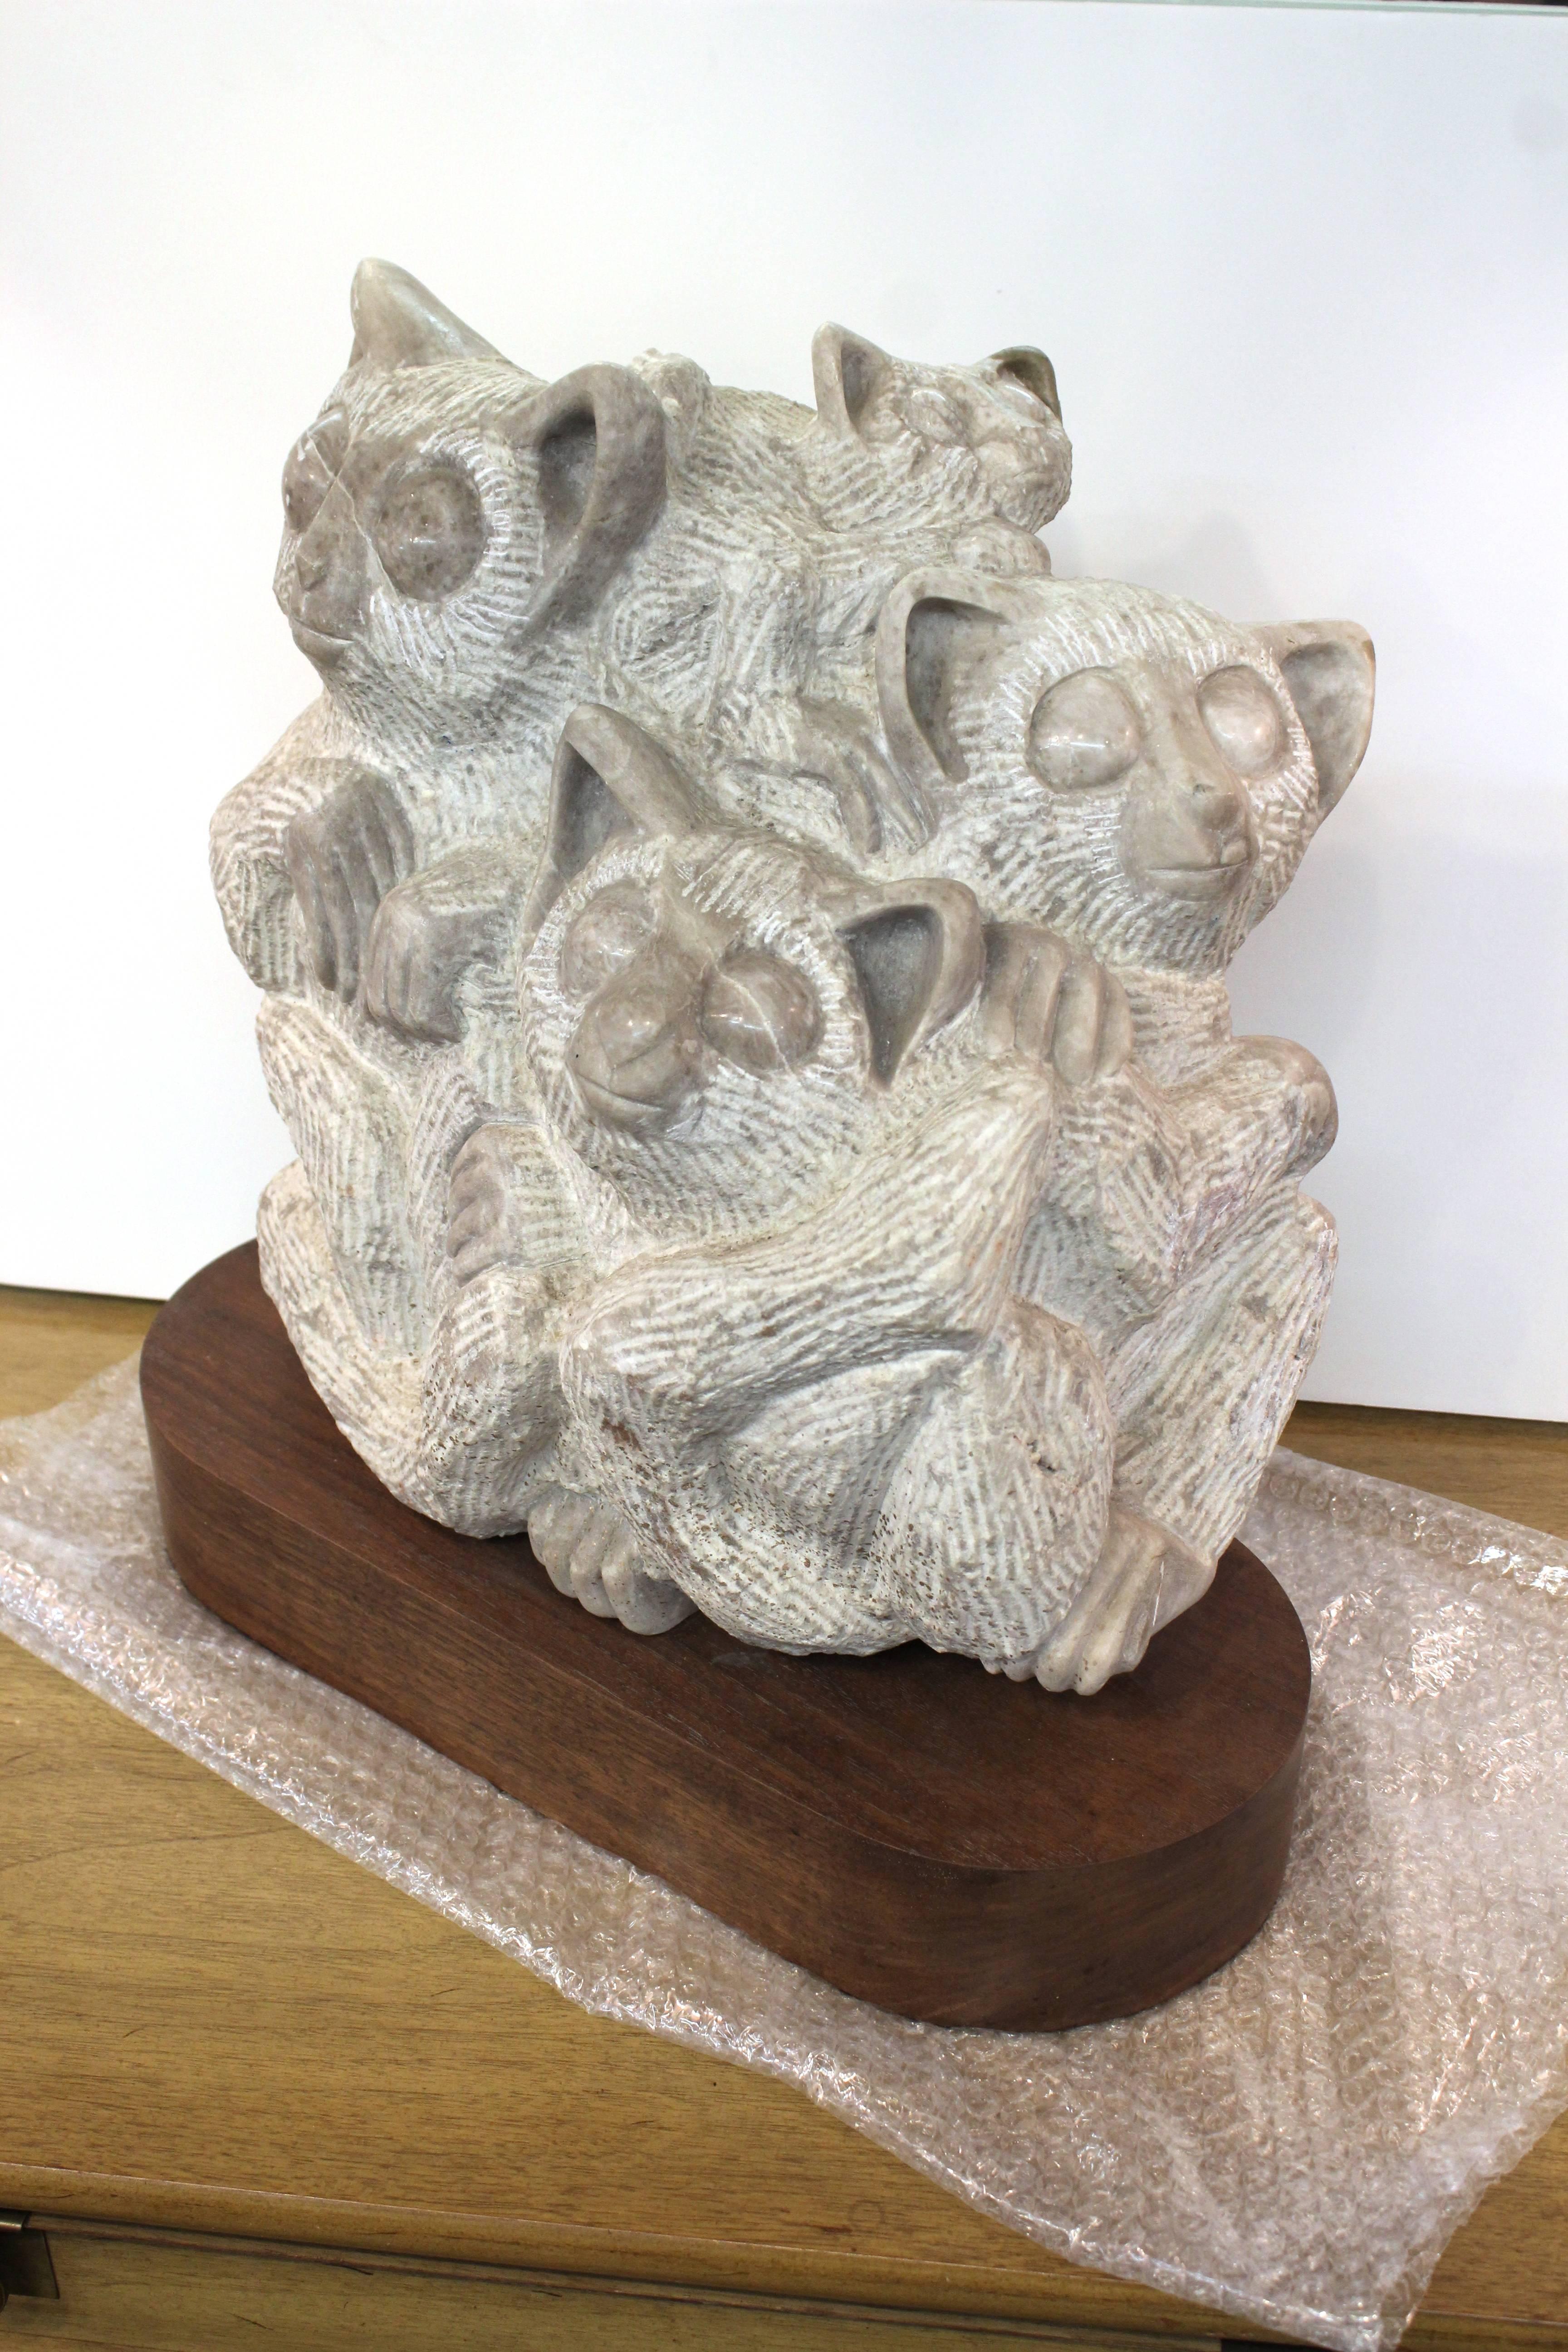 Midcentury lemur sculpture. Carved in marble and mounted on a wood base. The sculpture depicts several lemurs huddled together. The piece remains in very good condition.